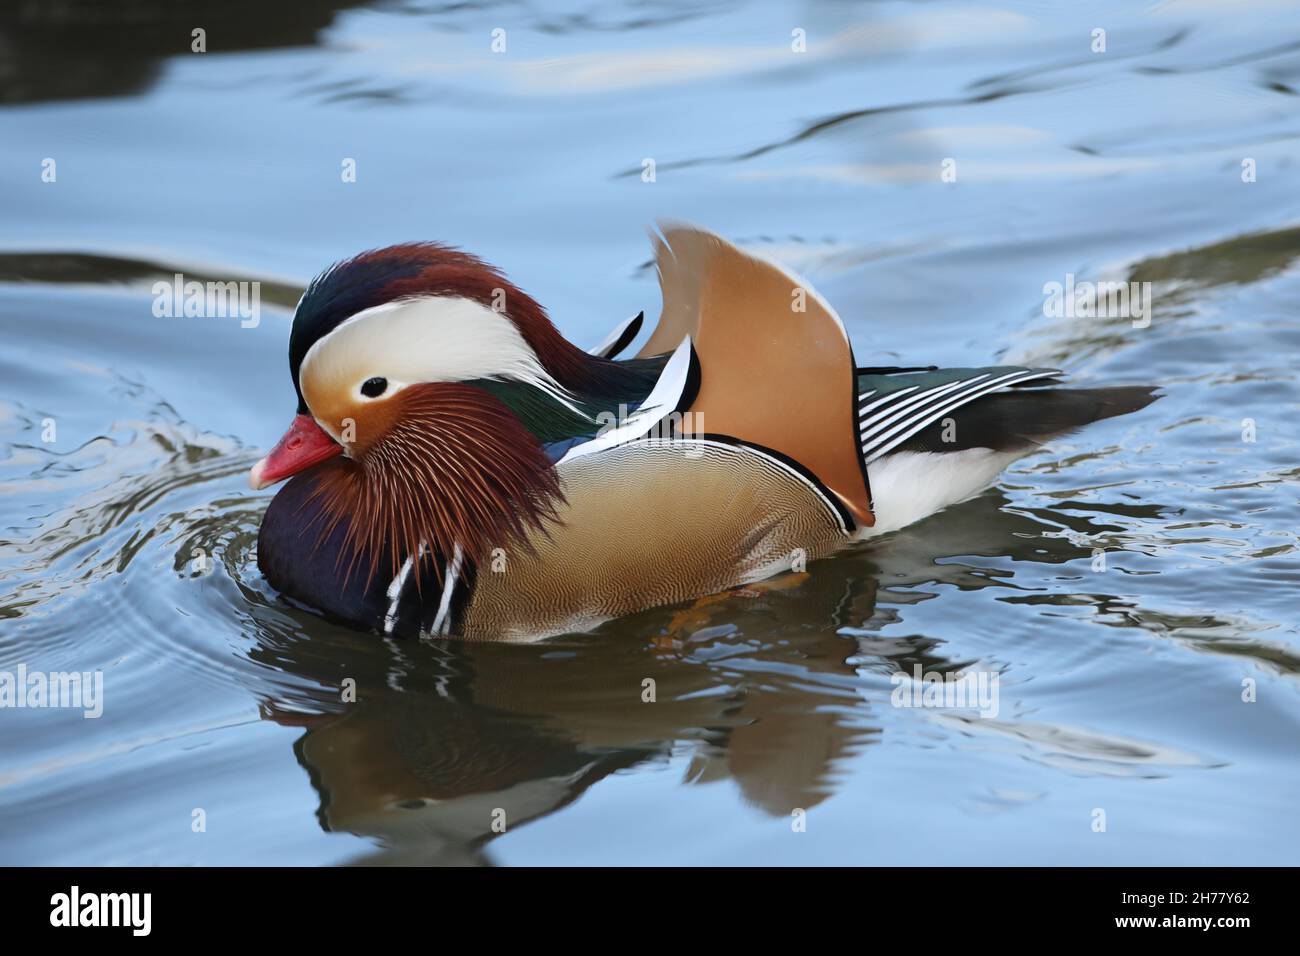 Mandarin Duck (Aix galericulata). Male in breeding plumage. Swimming.  Tertial ‘sail’ feathers erect. Native eastern Asia. Introduced species UK Stock Photo